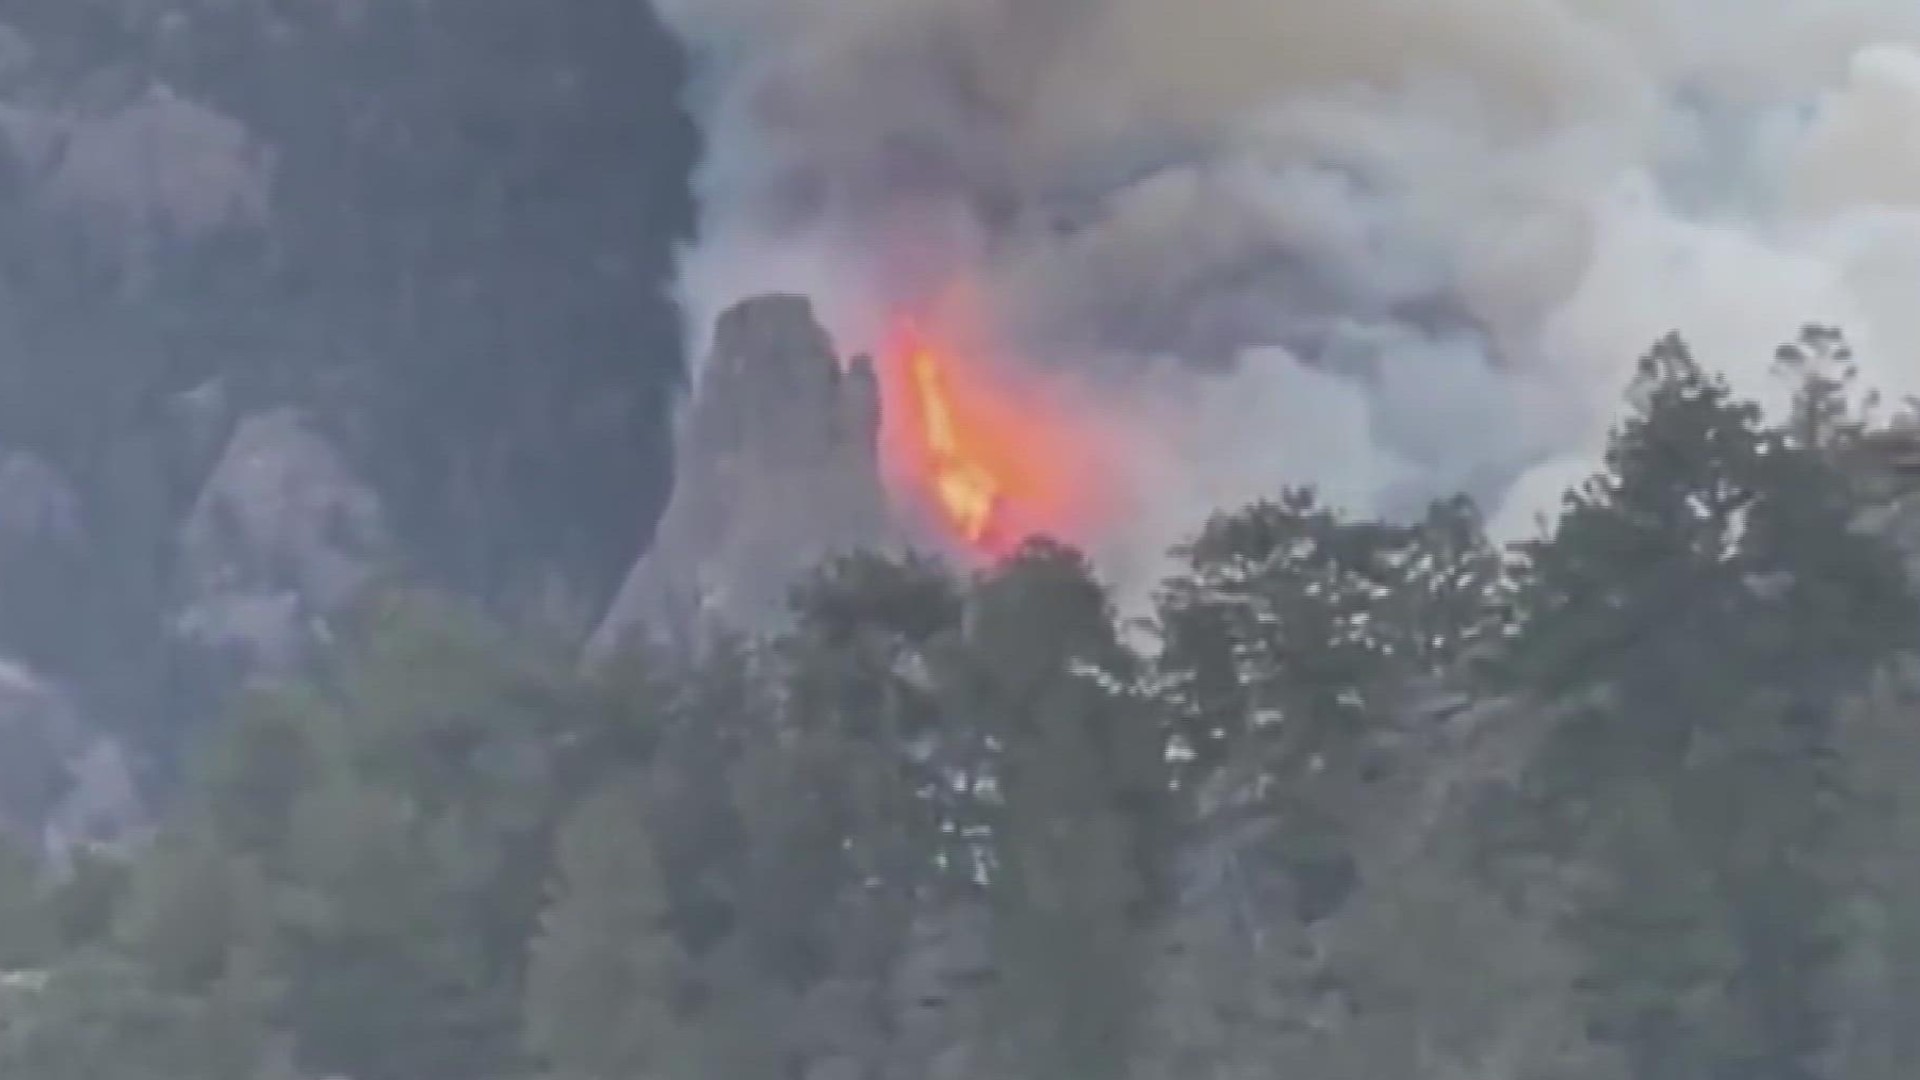 Eric Harrington shared this video of a fire burning near Estes Park that has prompted evacuation orders.